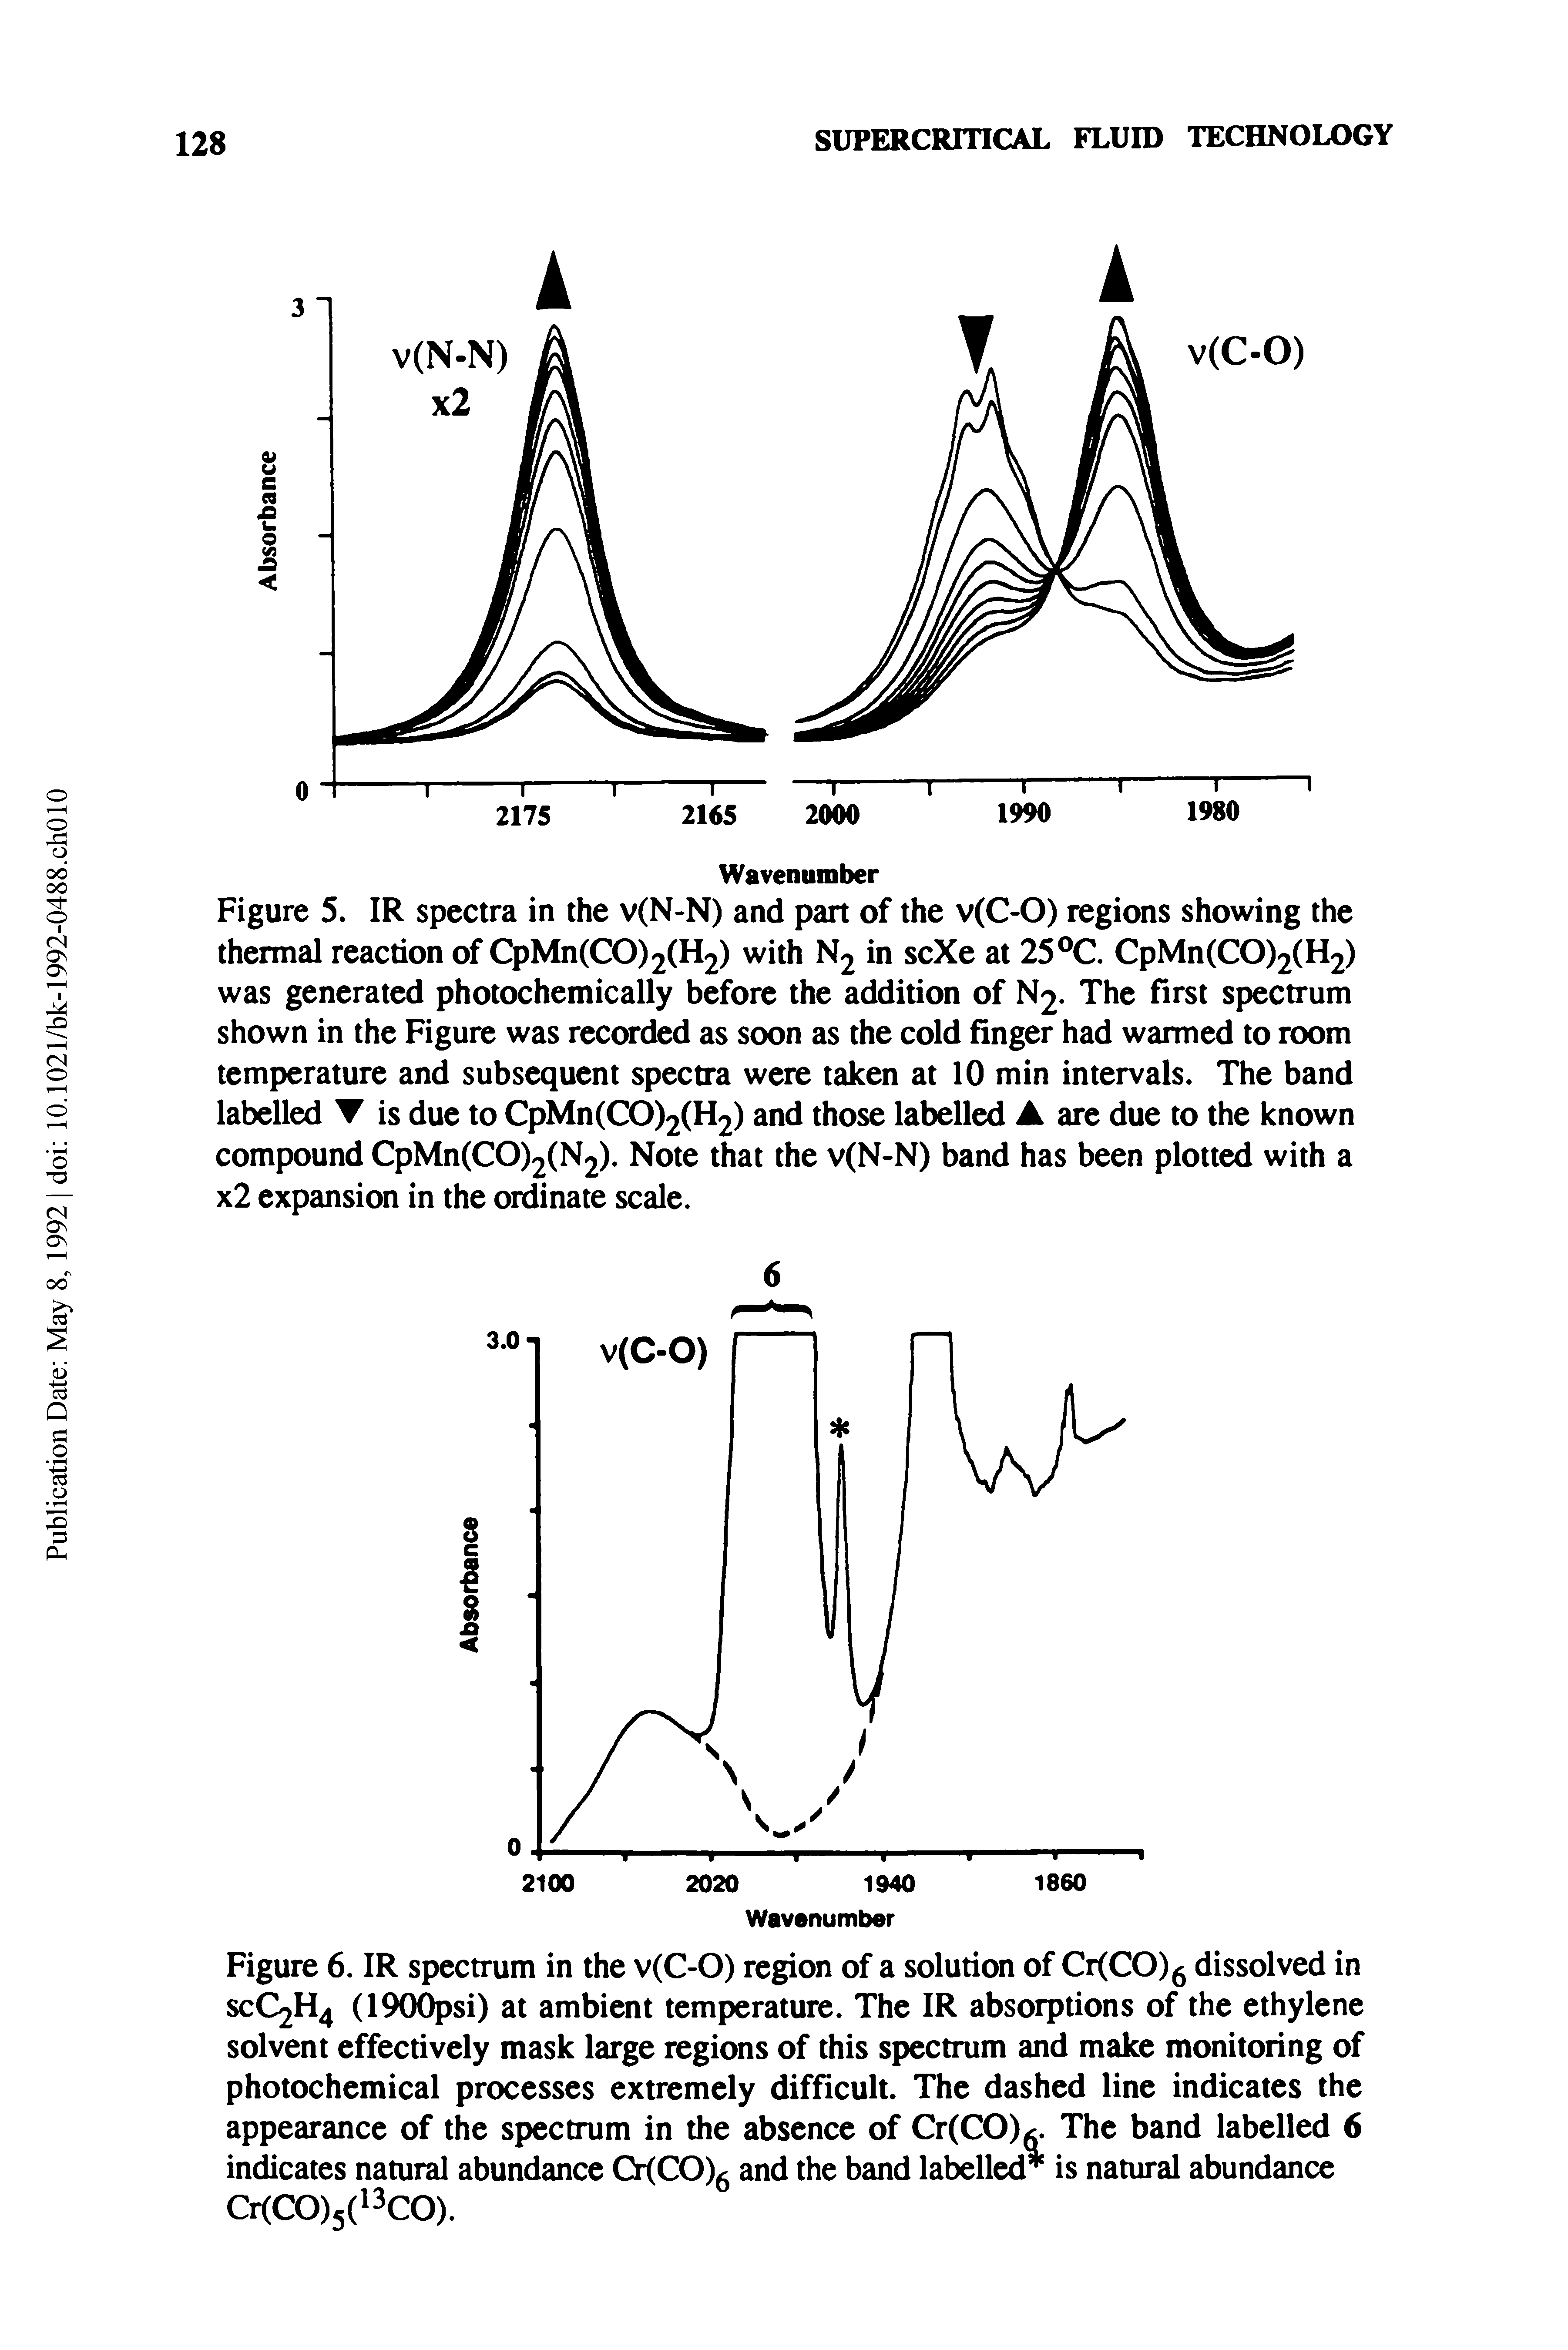 Figure 6. IR spectrum in the v(C-O) region of a solution of Cr(CO)6 dissolved in scCy (1900psi) at ambient temperature. The IR absorptions of the ethylene solvent effectively mask large regions of this spectrum and make monitoring of photochemical processes extremely difficult. The dashed line indicates the appearance of the spectrum in the absence of Cr(CO> The band labelled 6 indicates natural abundance Cr(CO)6 and the band labelled is natural abundance Cr(CO)5(13CO).